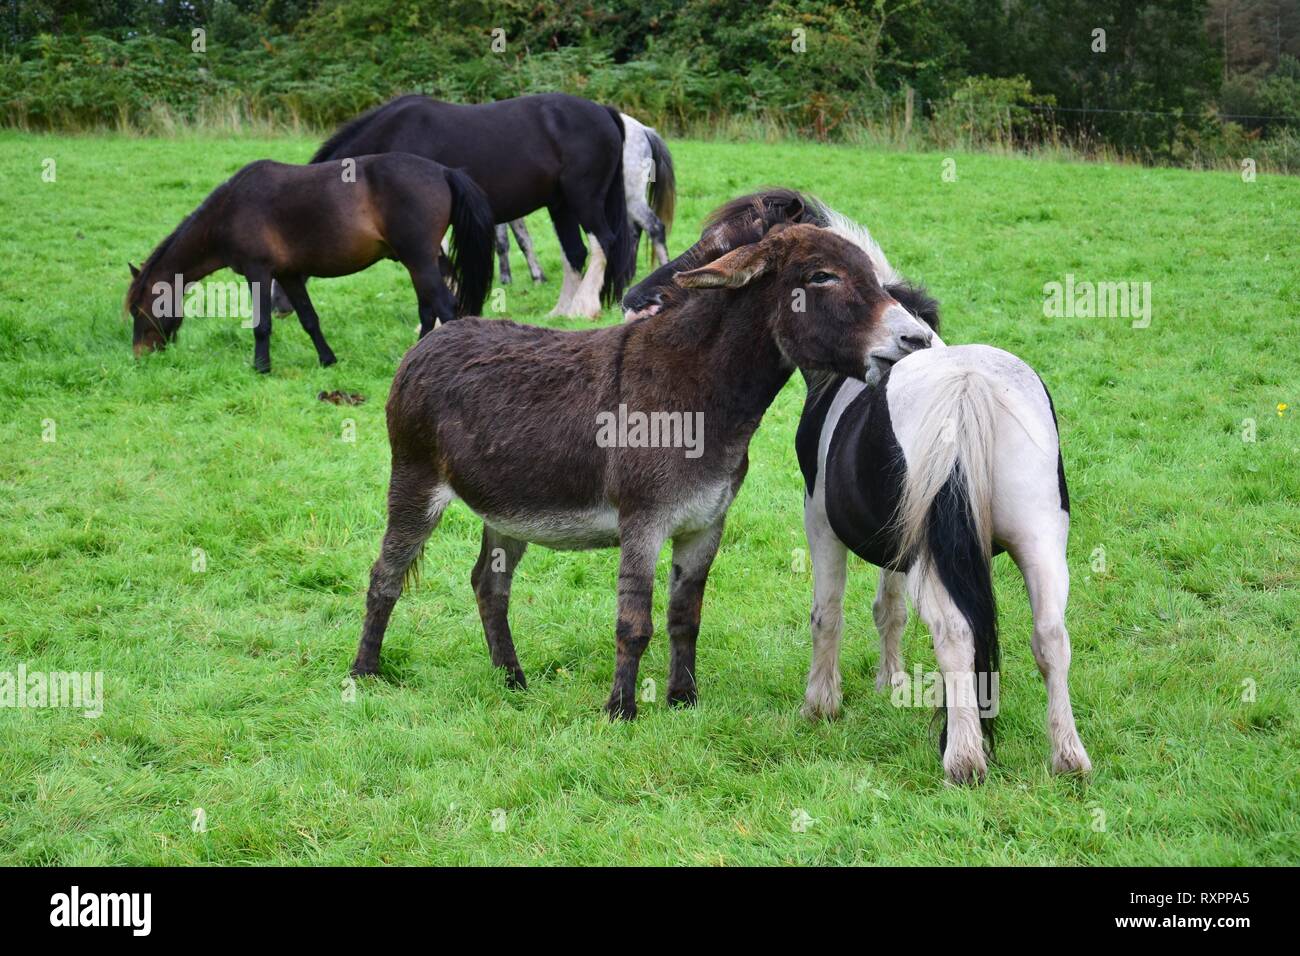 A brown donkey and a piebald Shetlandpony grooming each other on a meadow in Ireland. Stock Photo